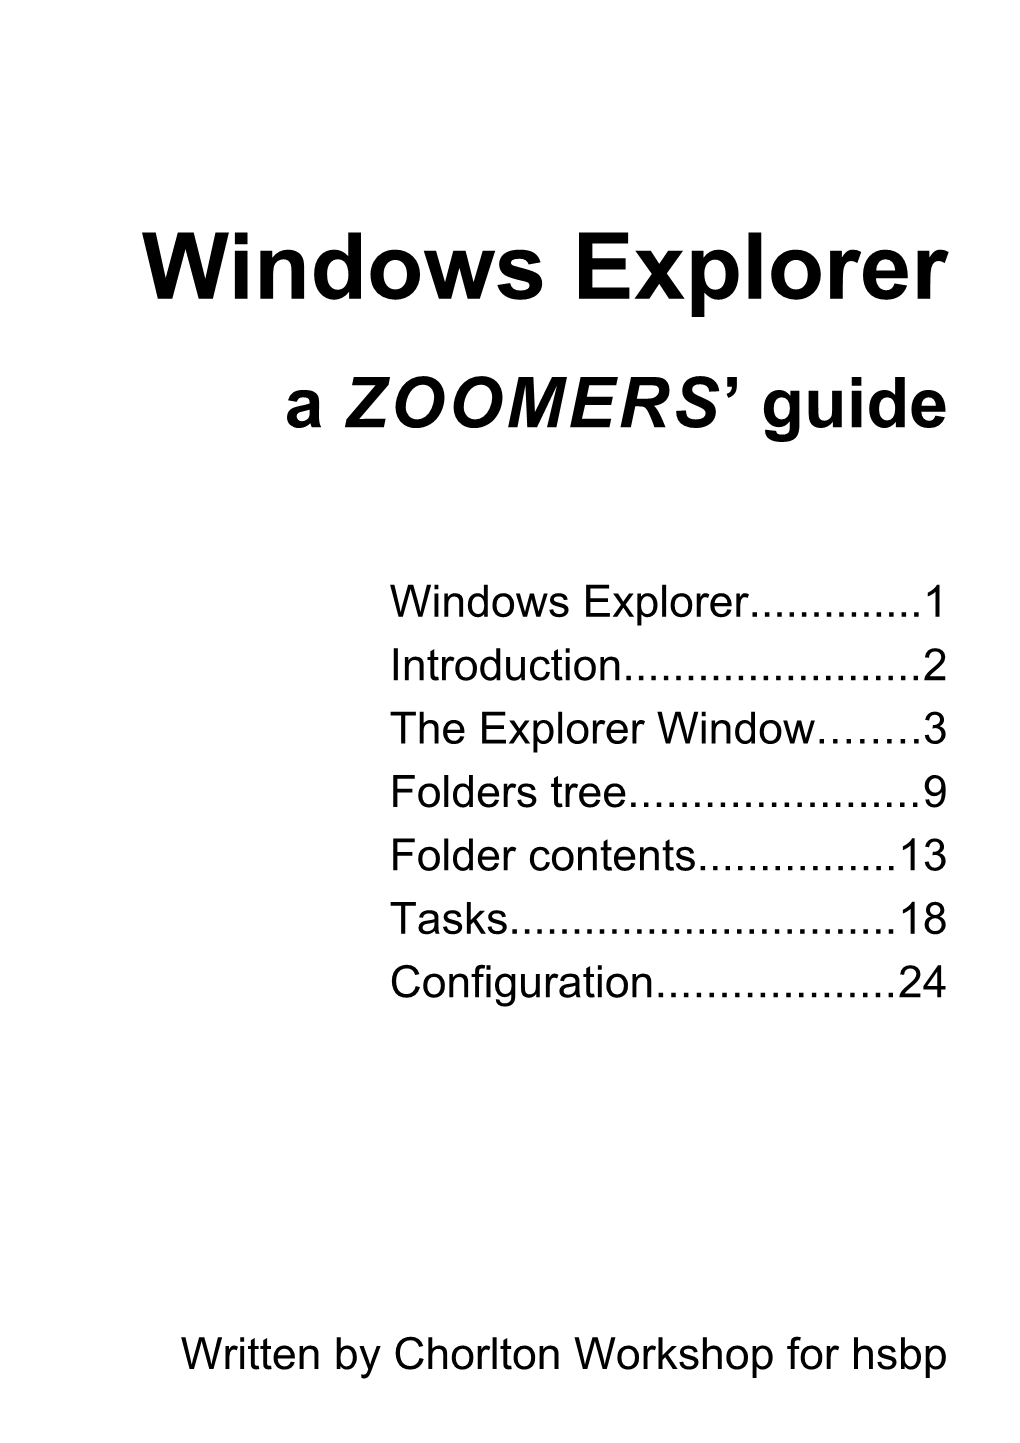 Windows Explorer: a Zoomers' Guide